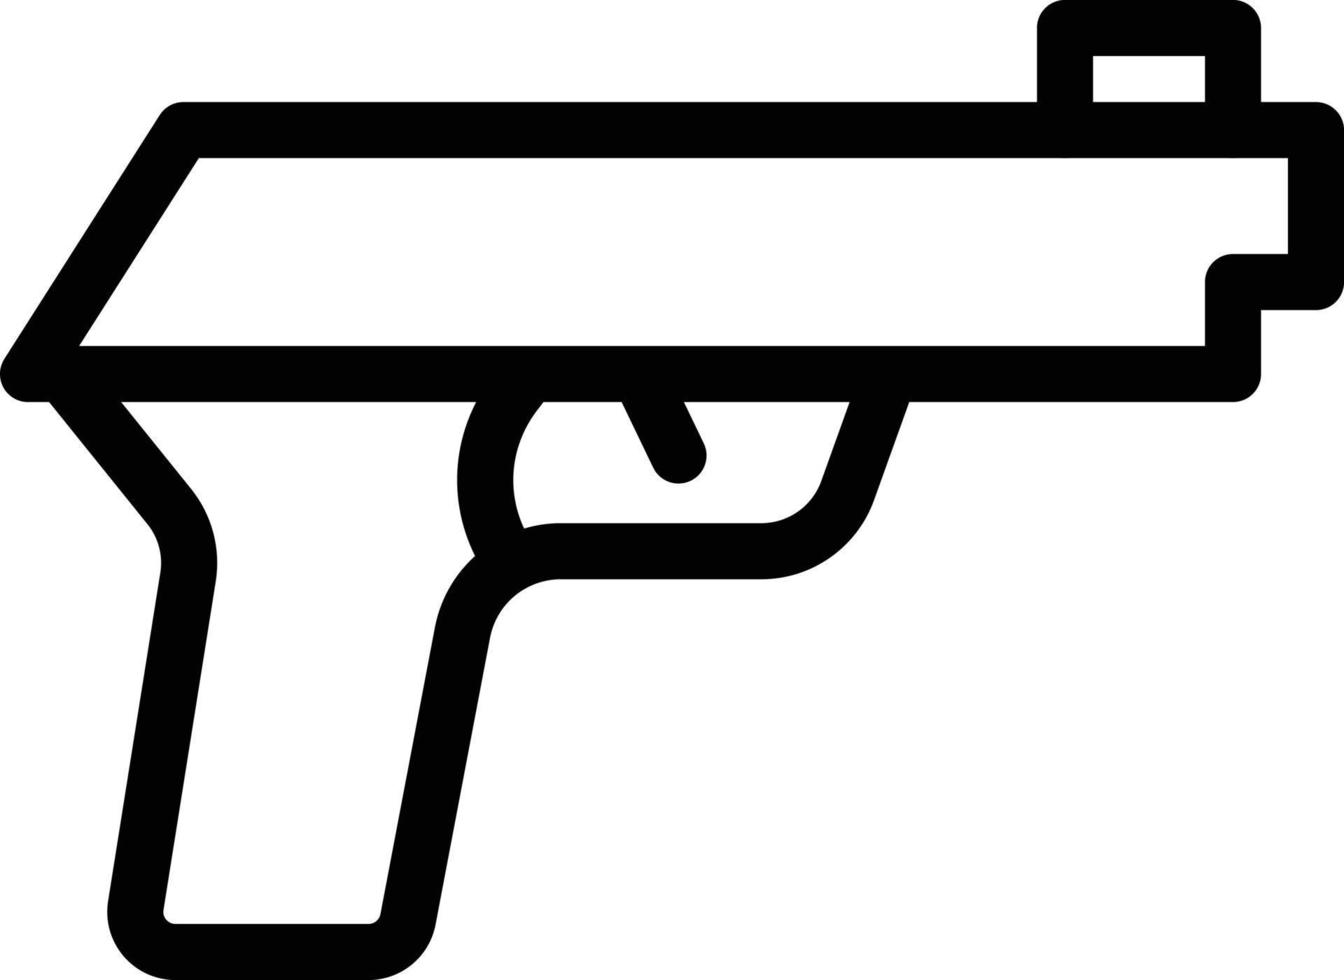 pistol vector illustration on a background.Premium quality symbols.vector icons for concept and graphic design.